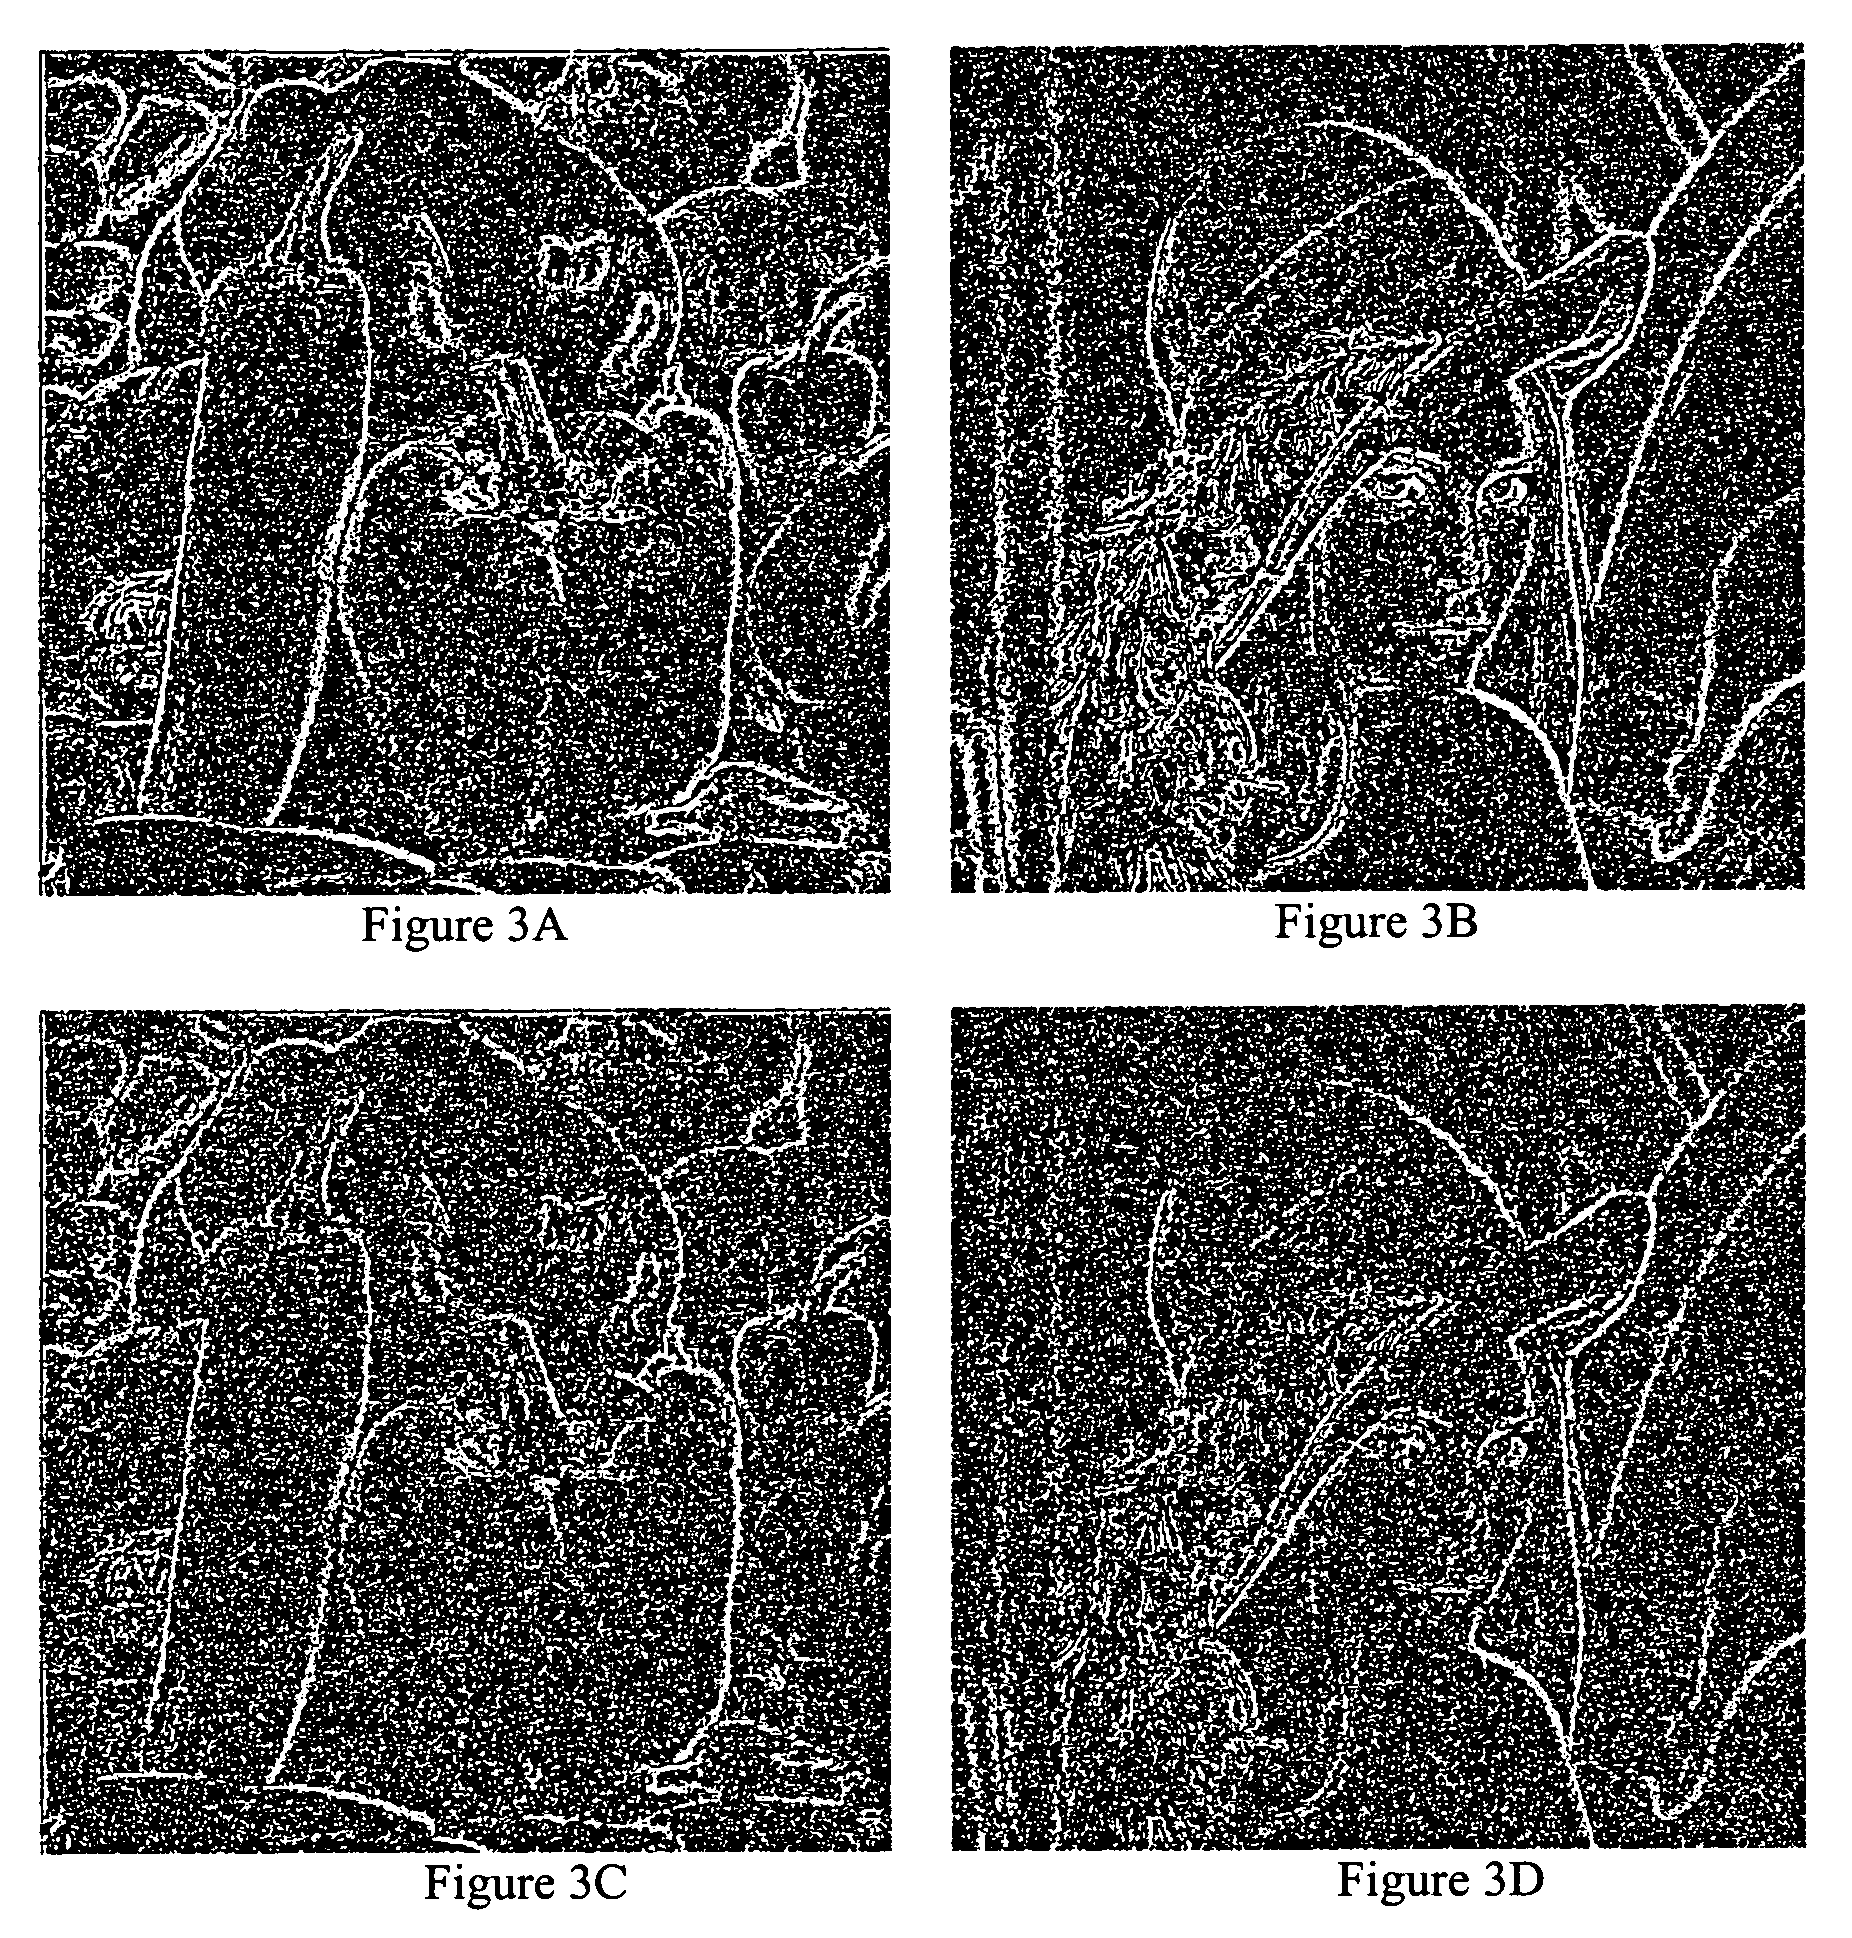 Image denoising based on wavelets and multifractals for singularity detection and multiscale anisotropic diffusion